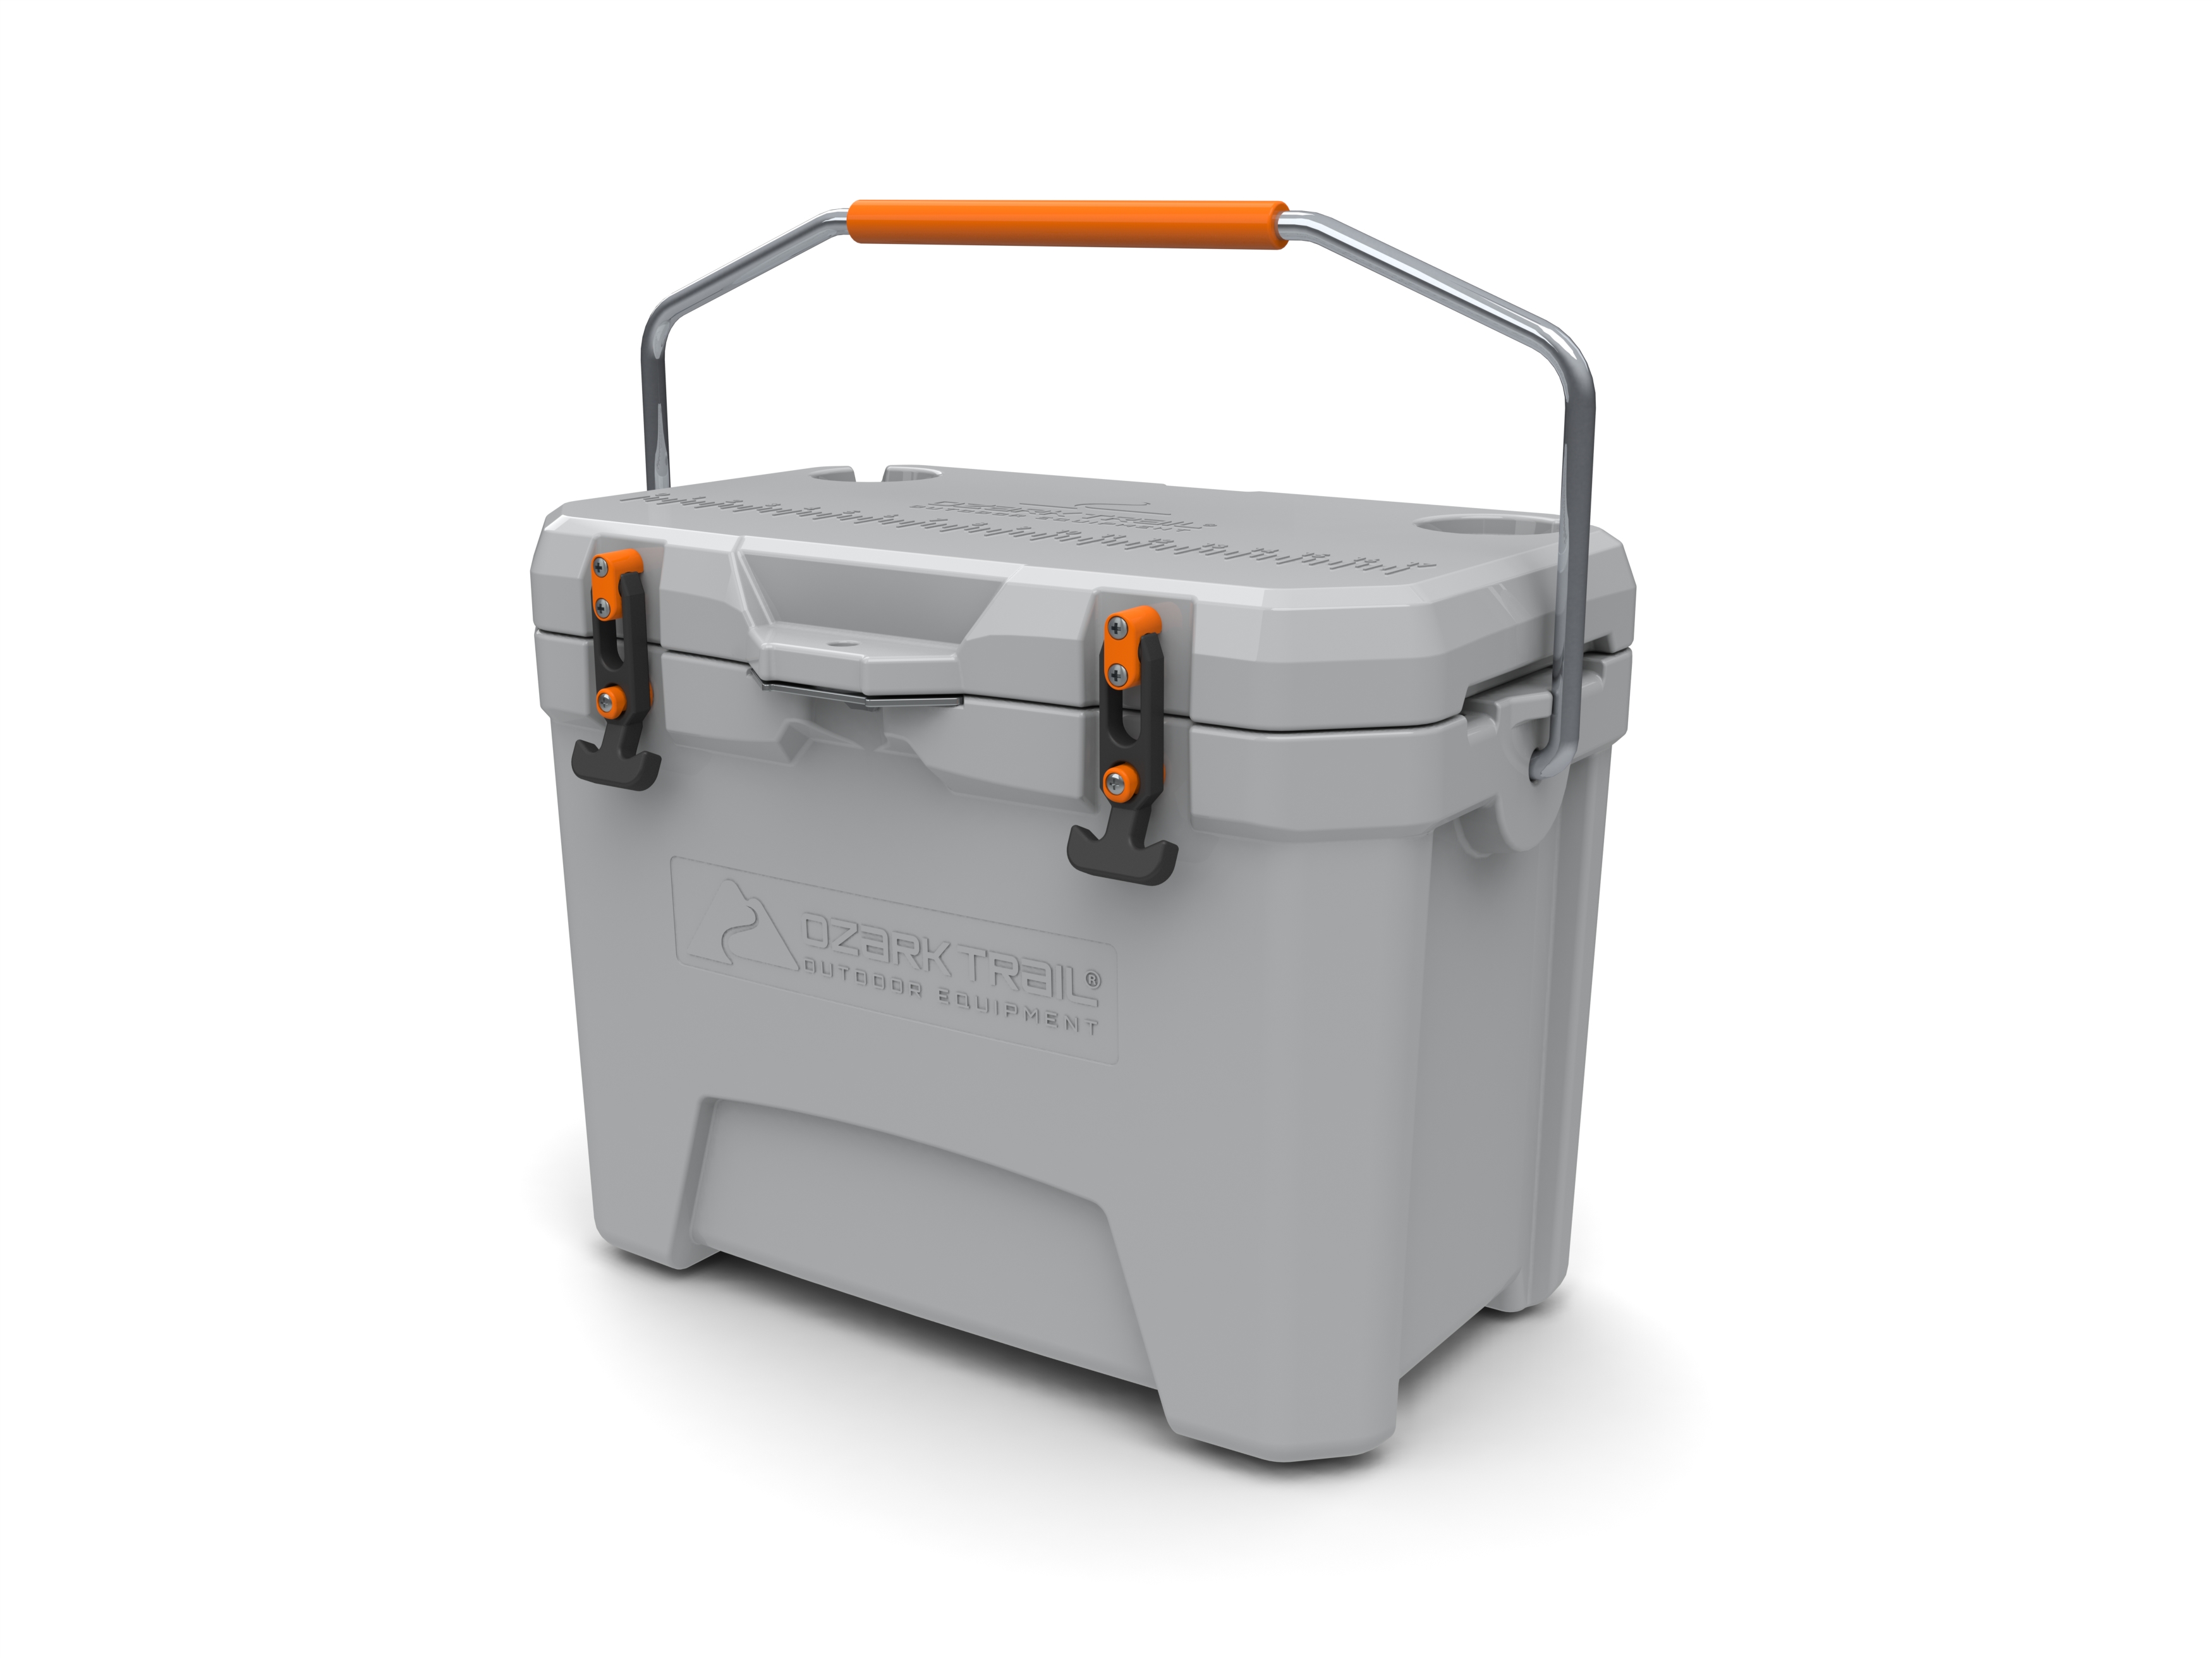 Ozark Trail 26Qt High Performance Hard Sided Cooler , Gray - image 12 of 15